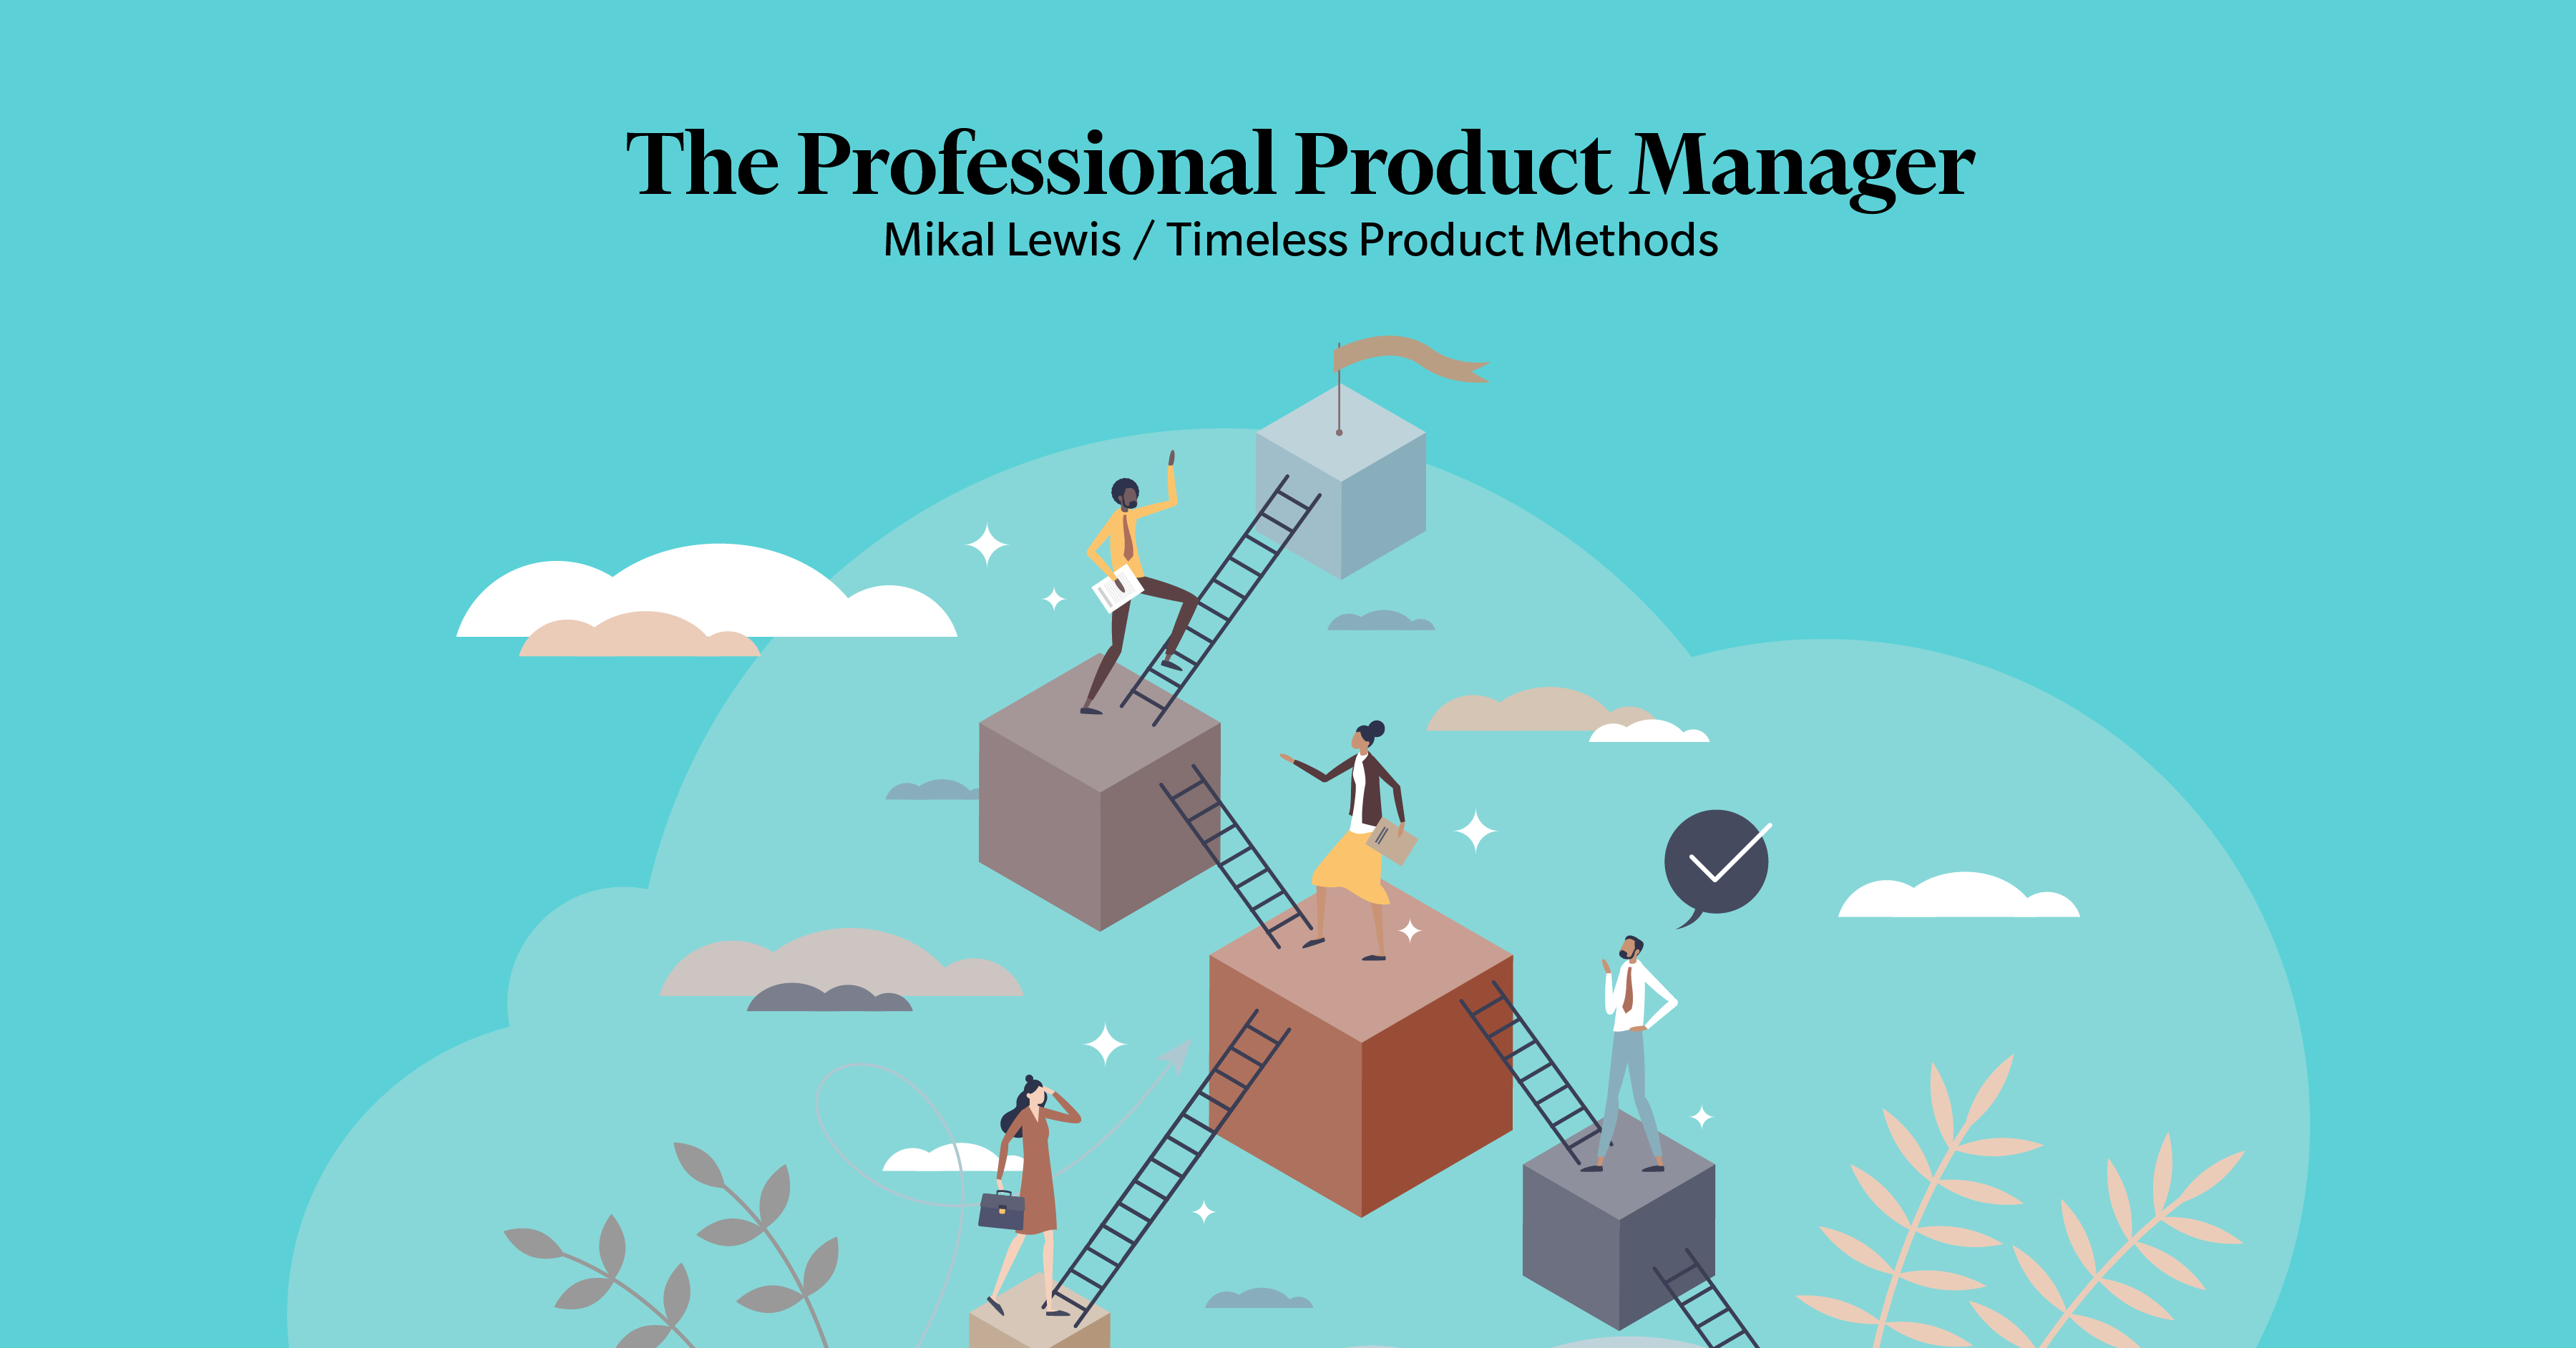 …. and The Professional Product Manager